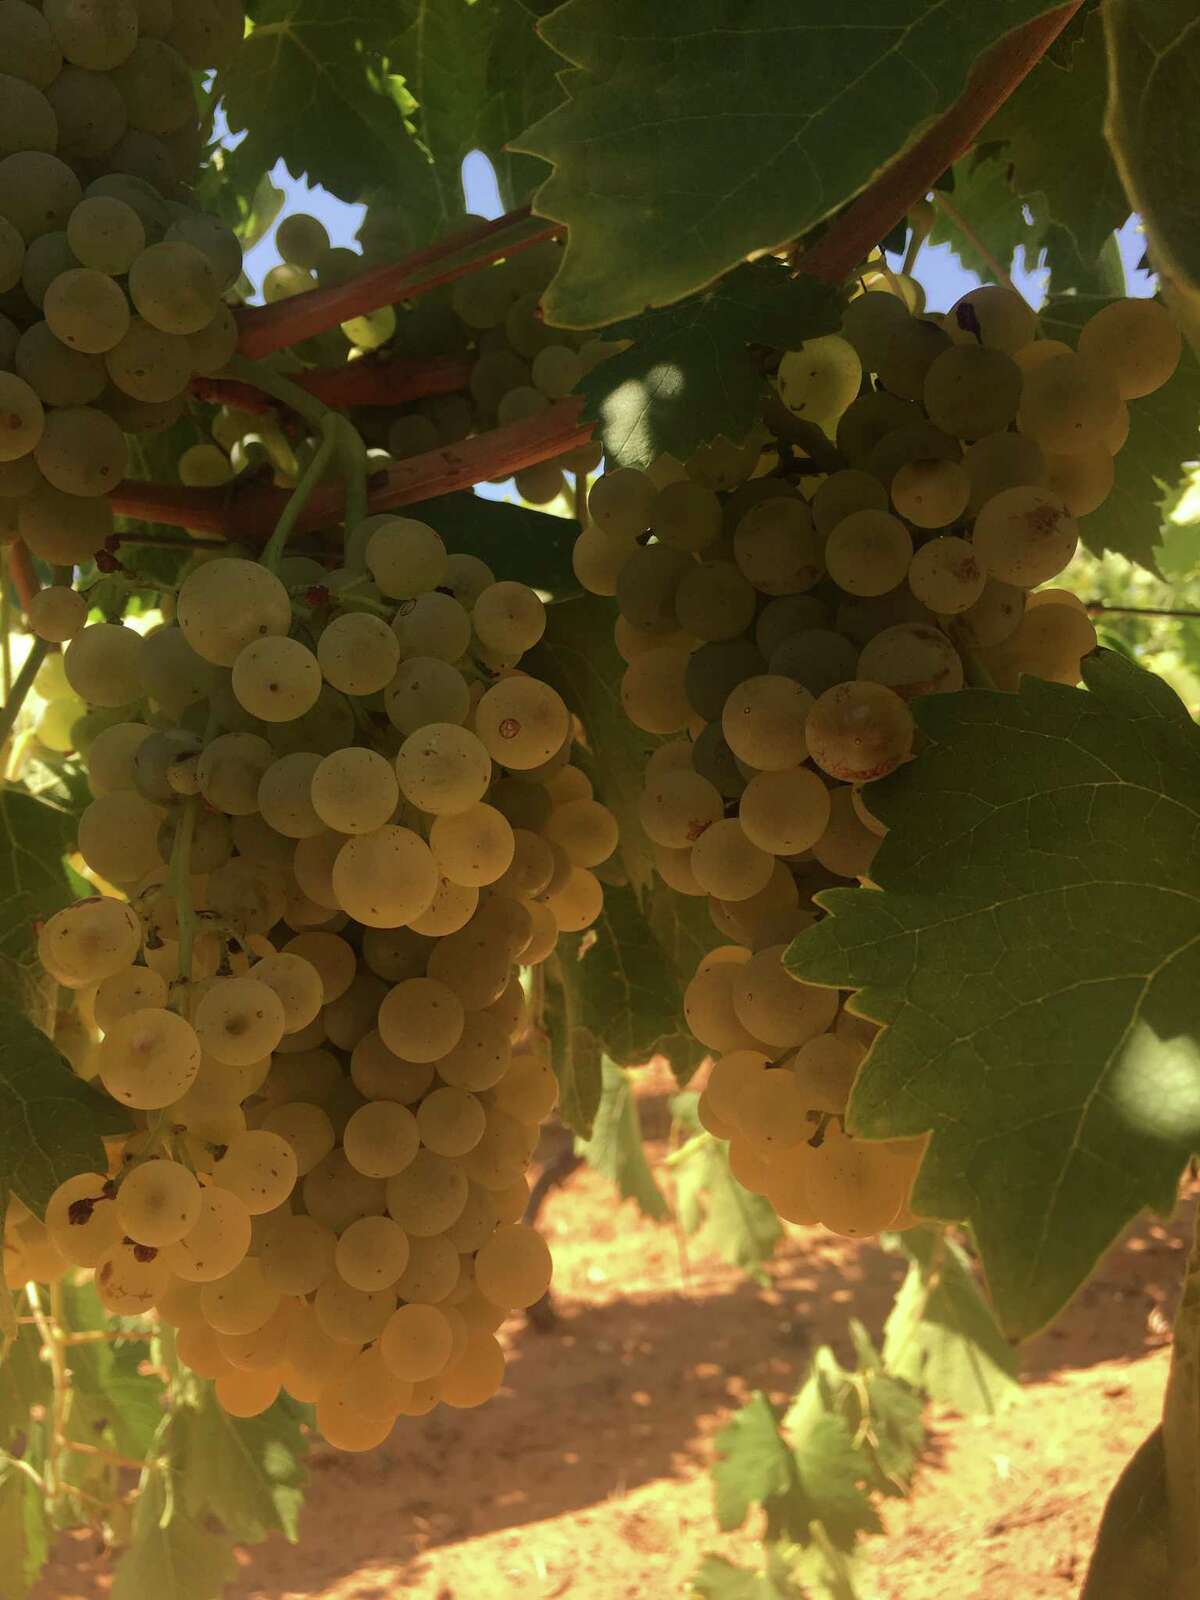 Albarino grapes are coming into Wedding Oak Winery to make some award-winning wines.